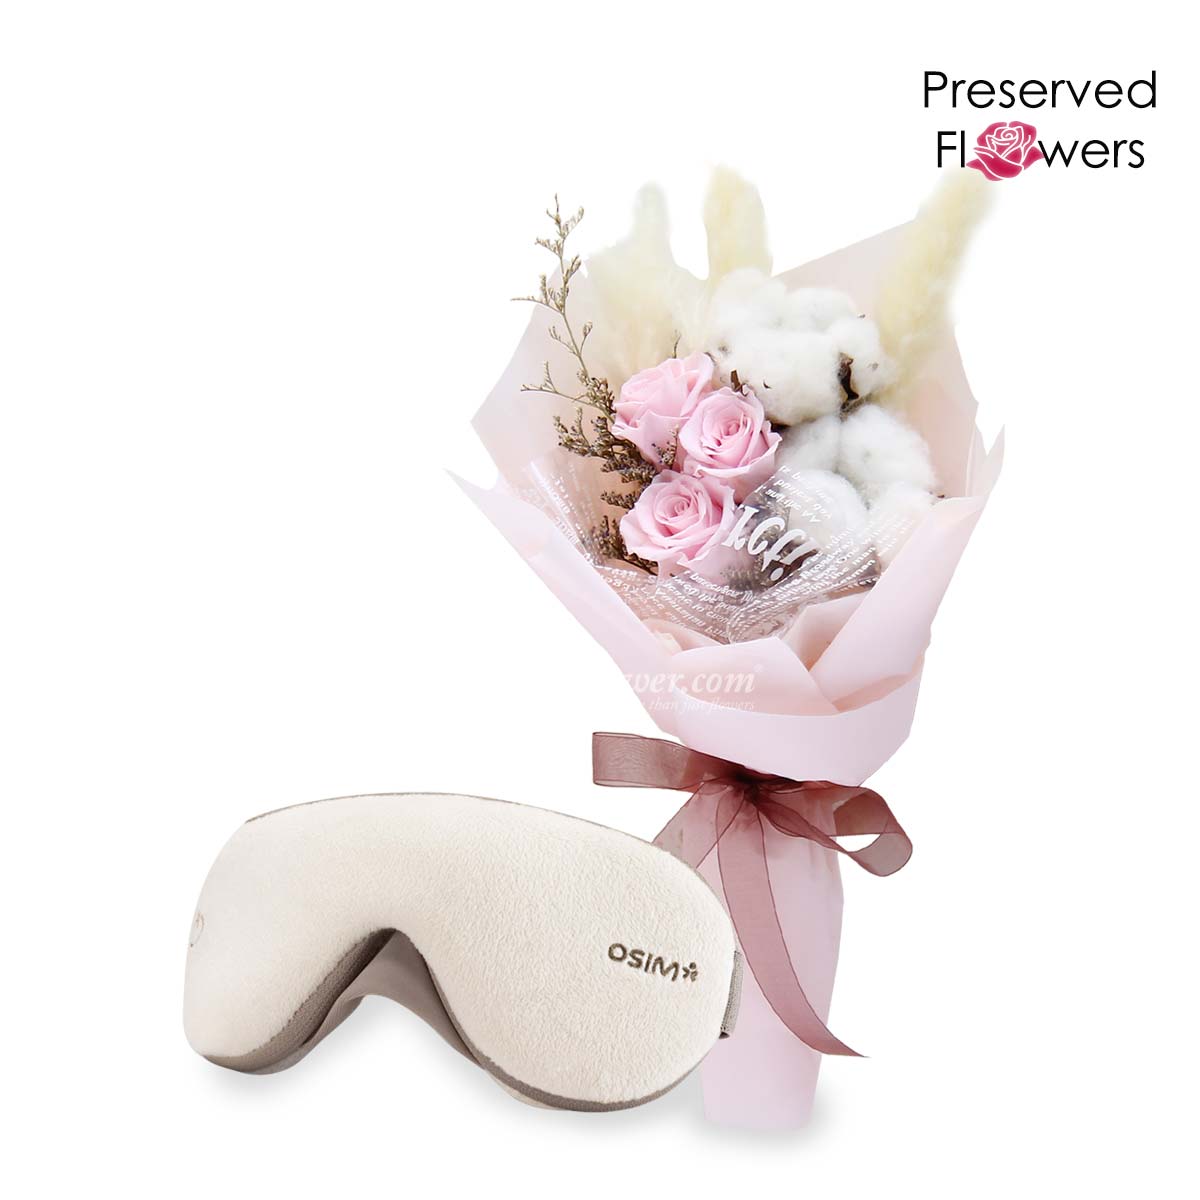 Soothing Love (Preserved Flowers with OSIM uMask Eye Massager)